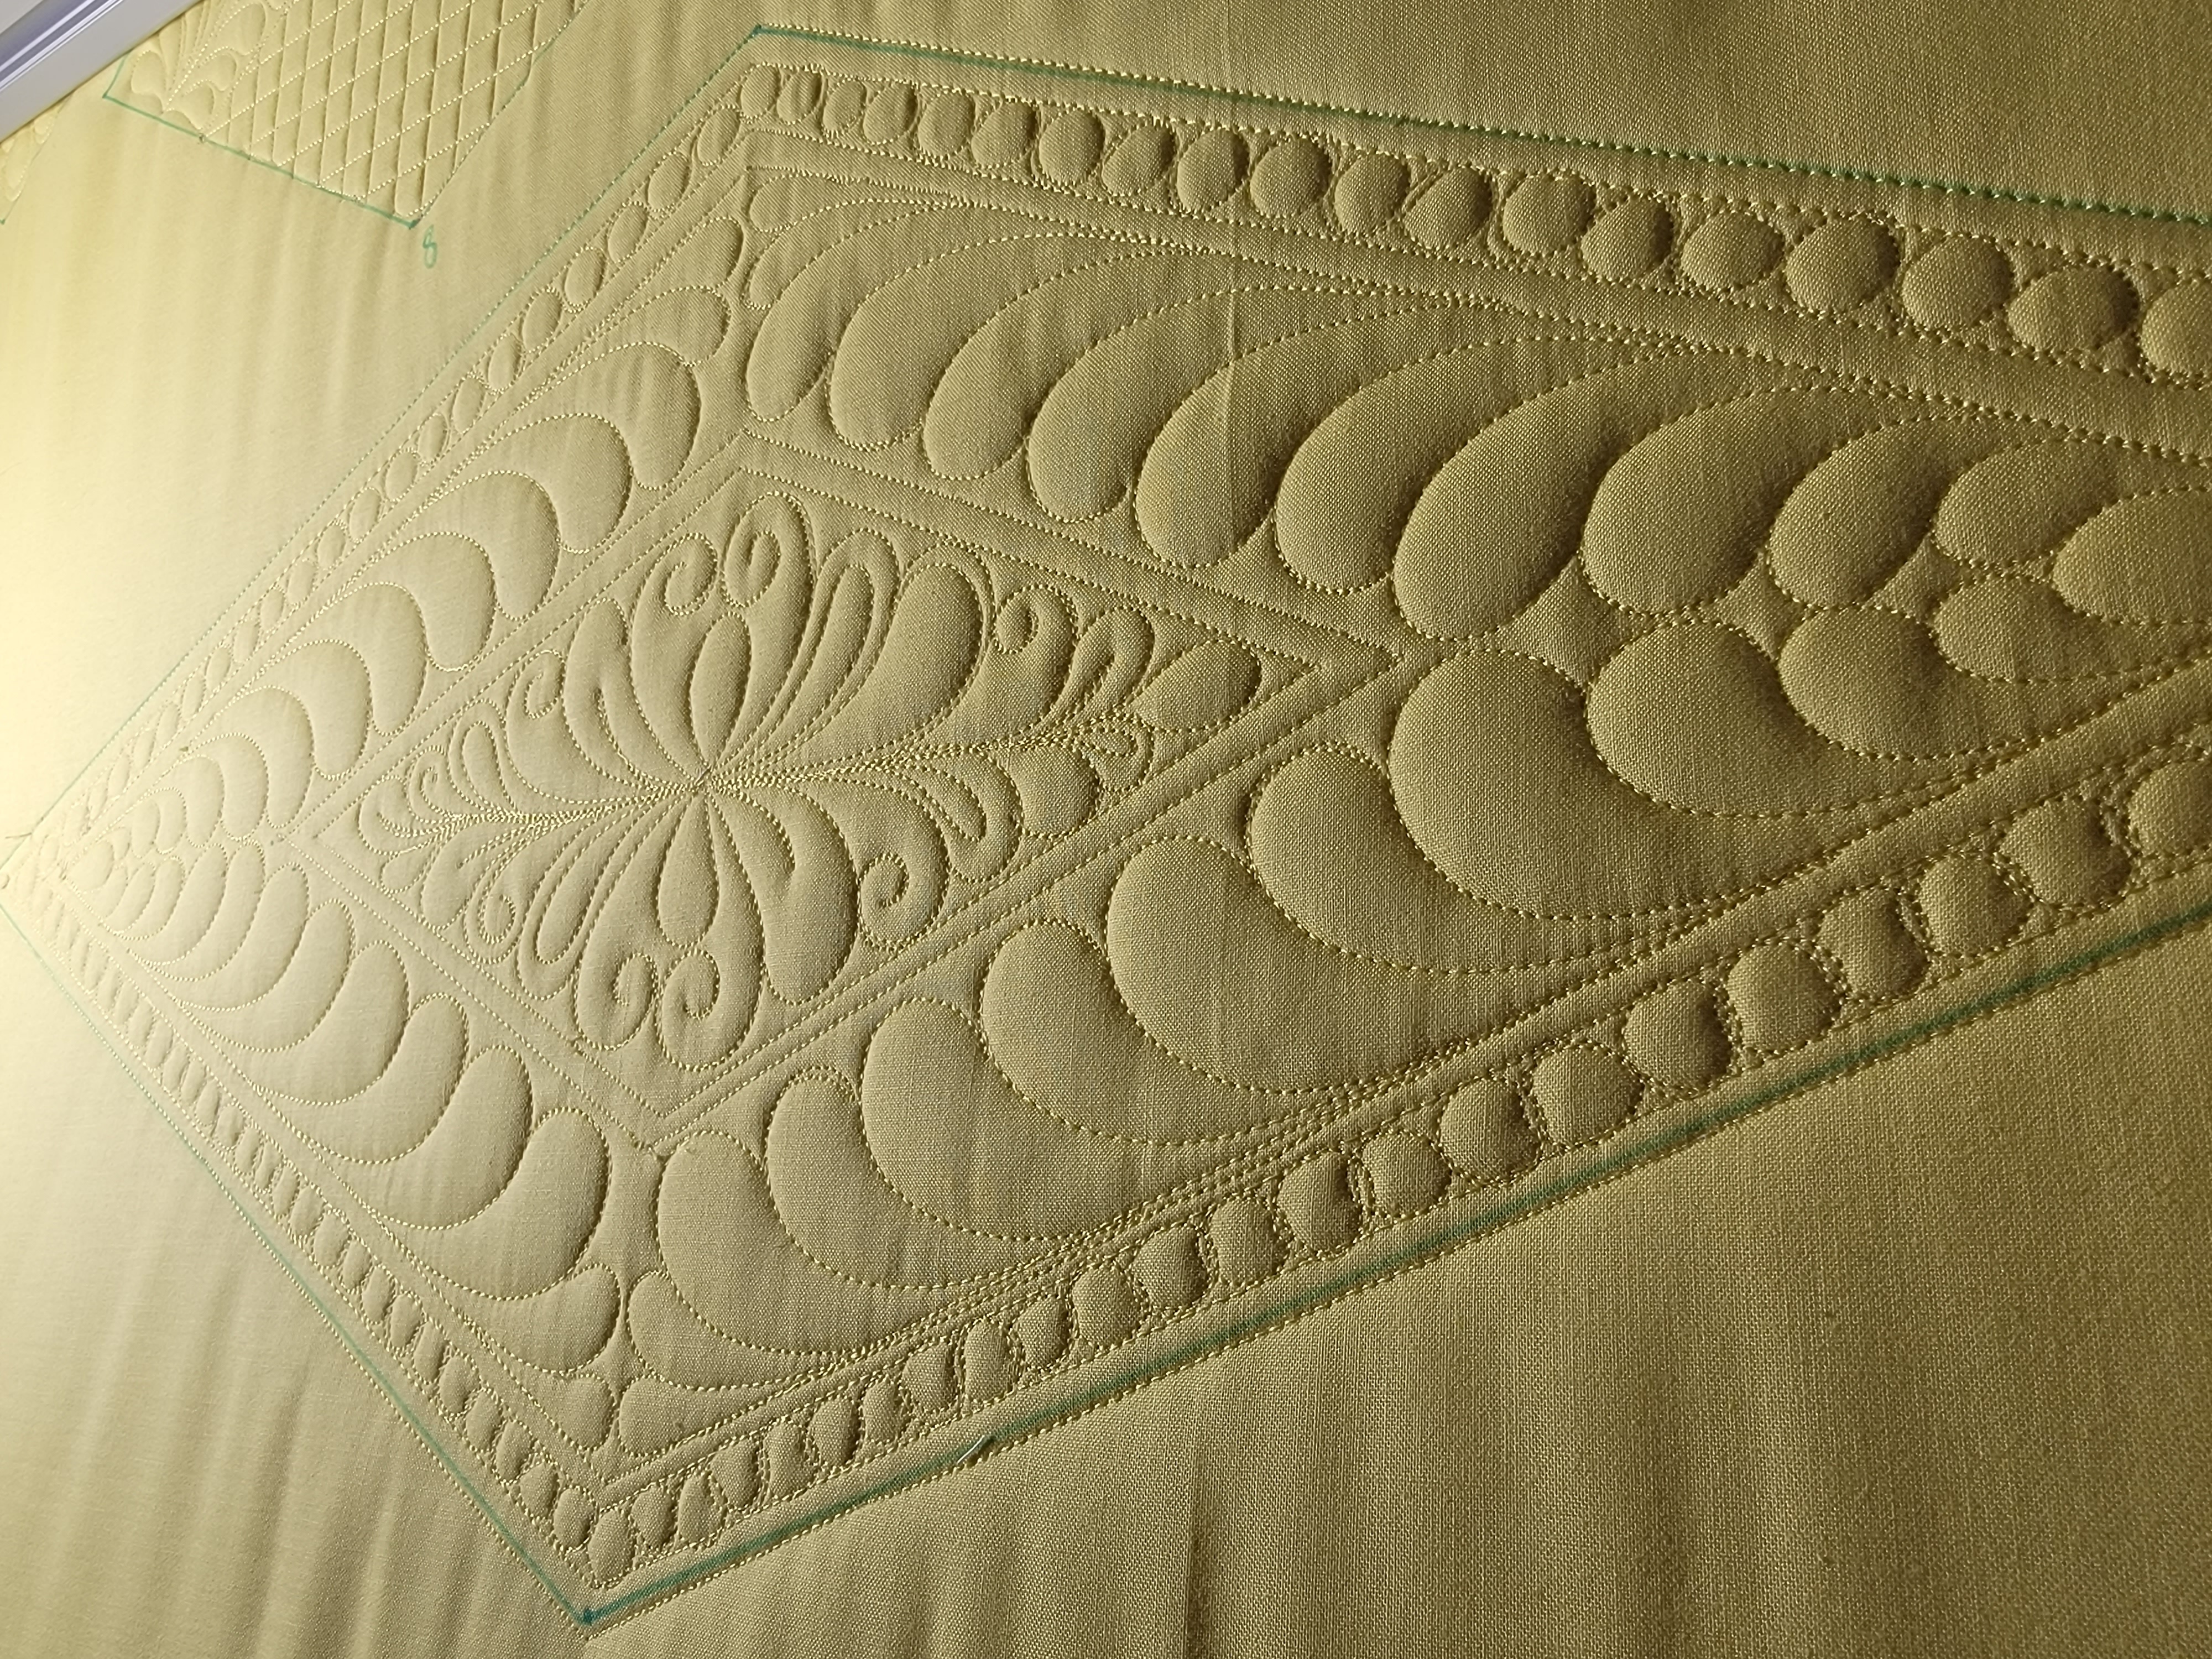 Echo Quilting Practice on a Longarm Machine